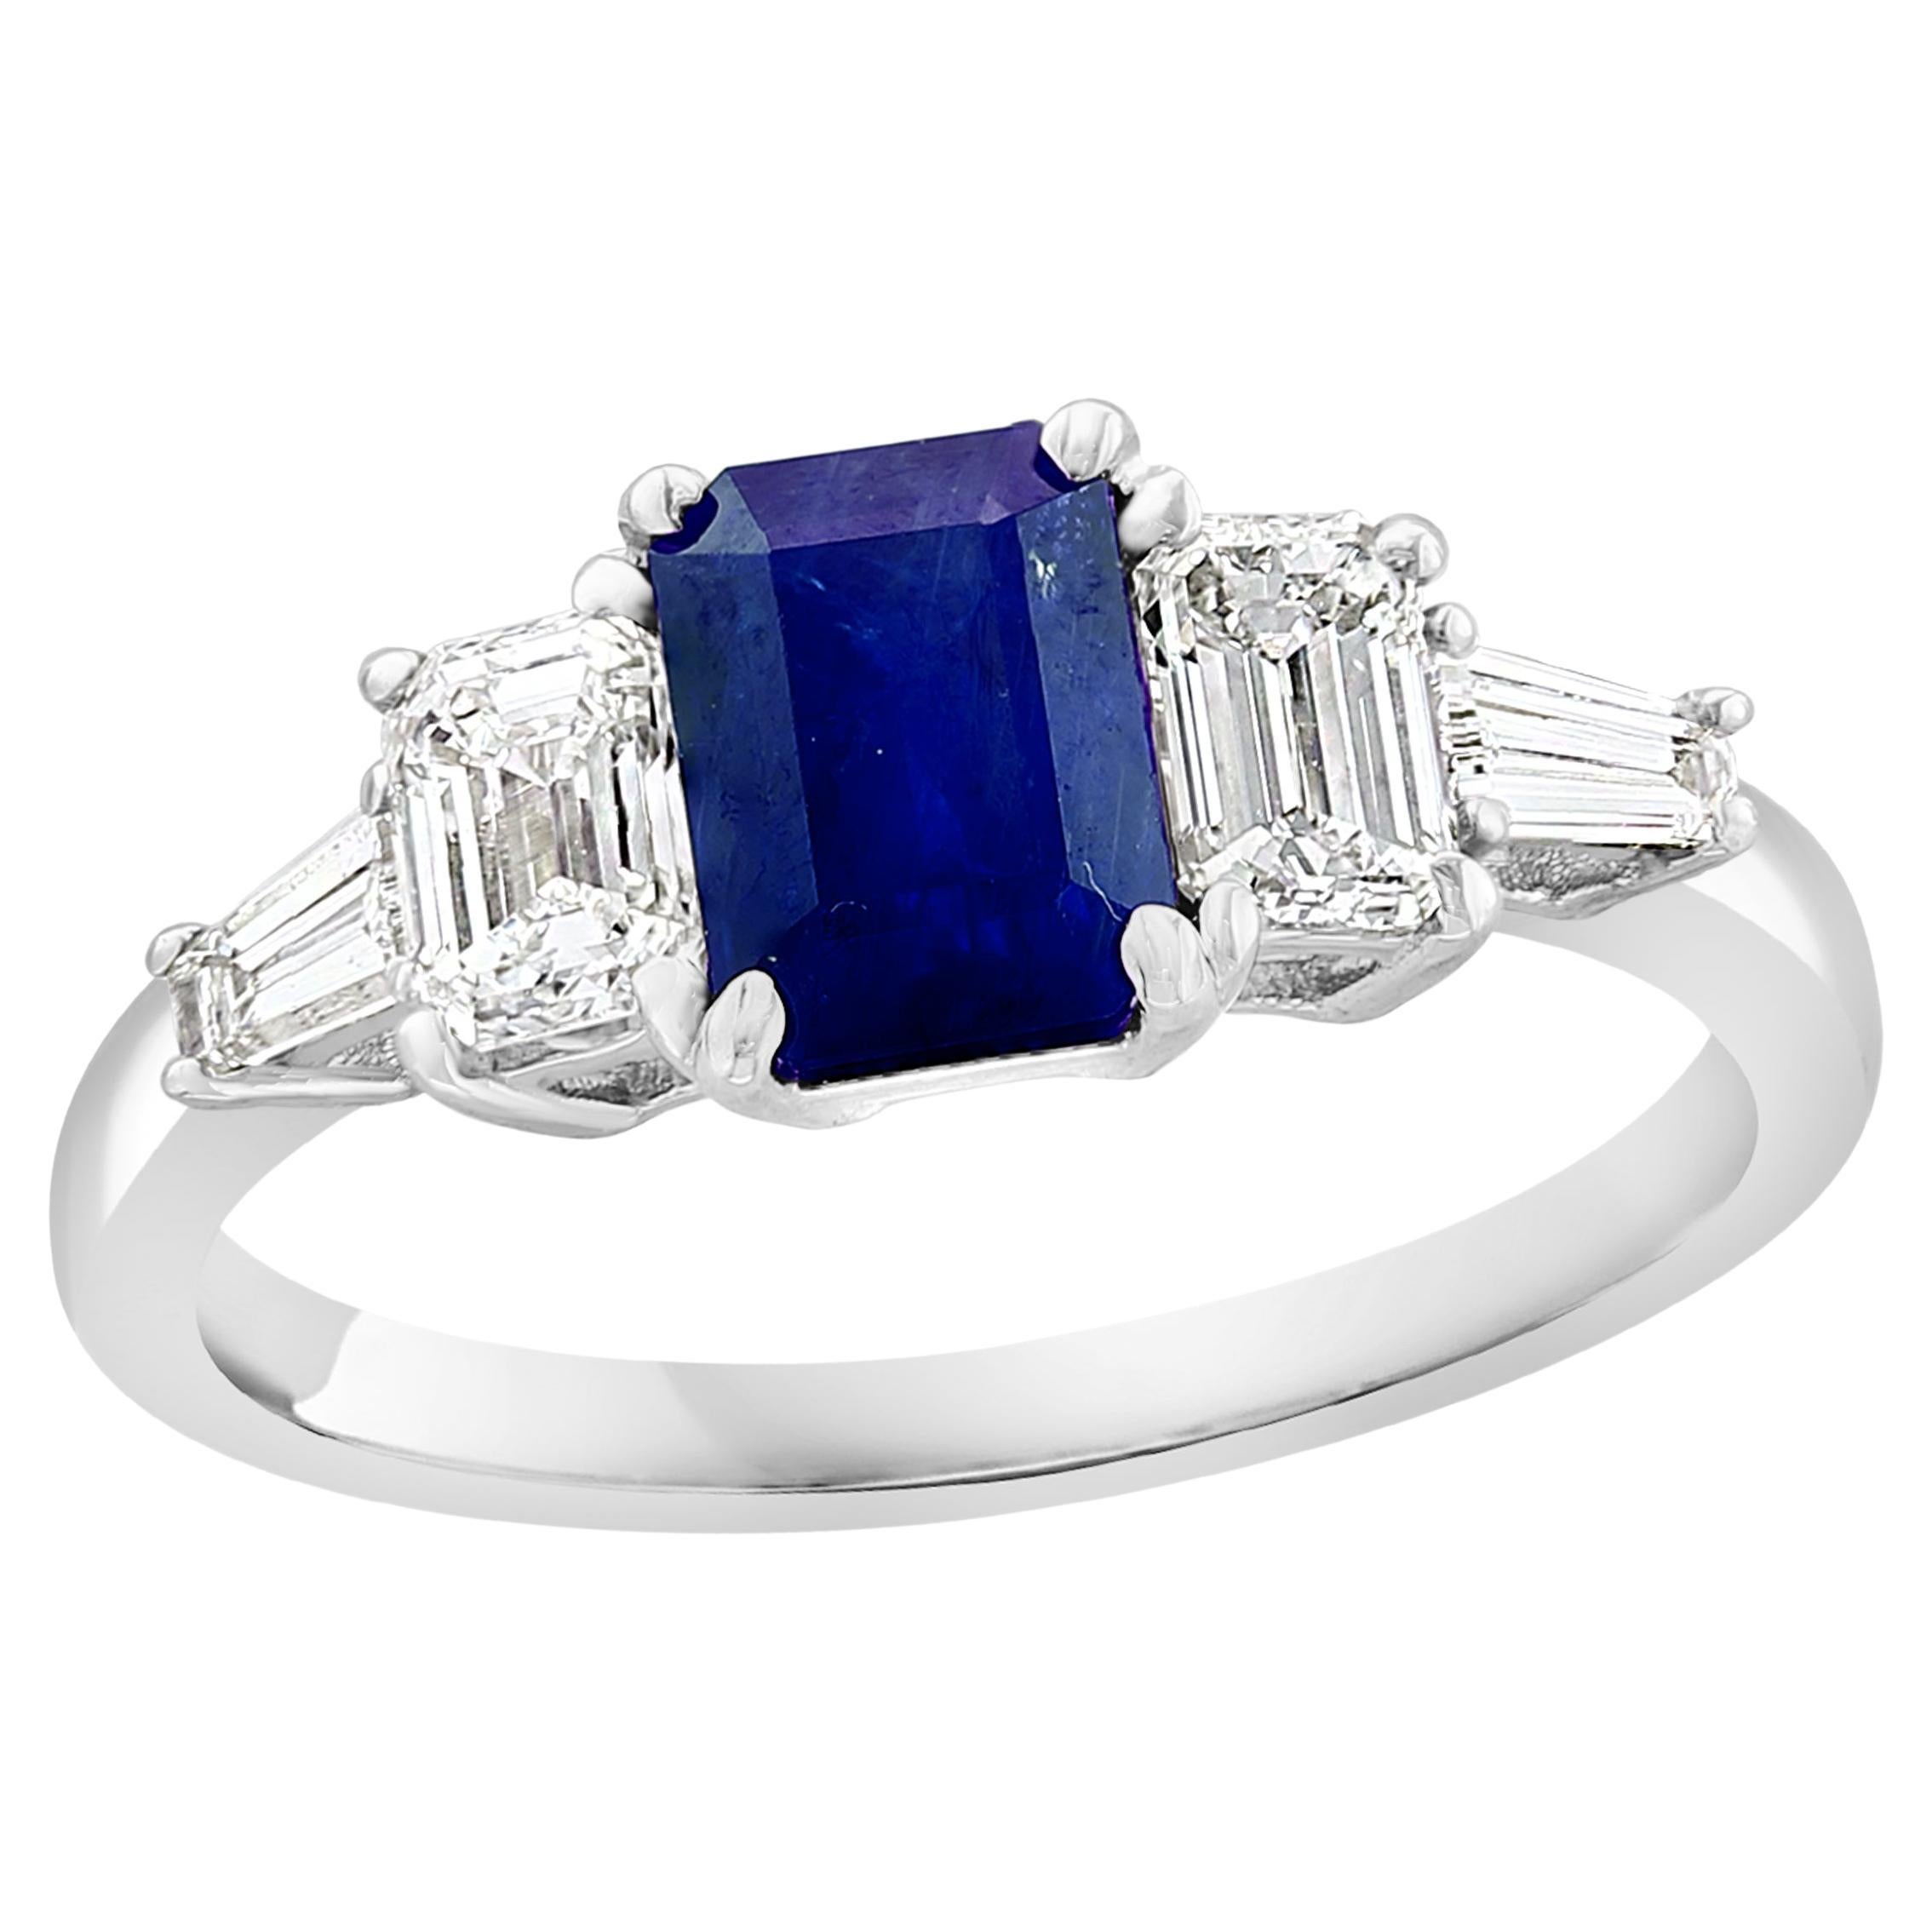 1.12 Carat Emerald Cut Blue Sapphire and Diamond 5 Stone Ring in 14K White Gold For Sale